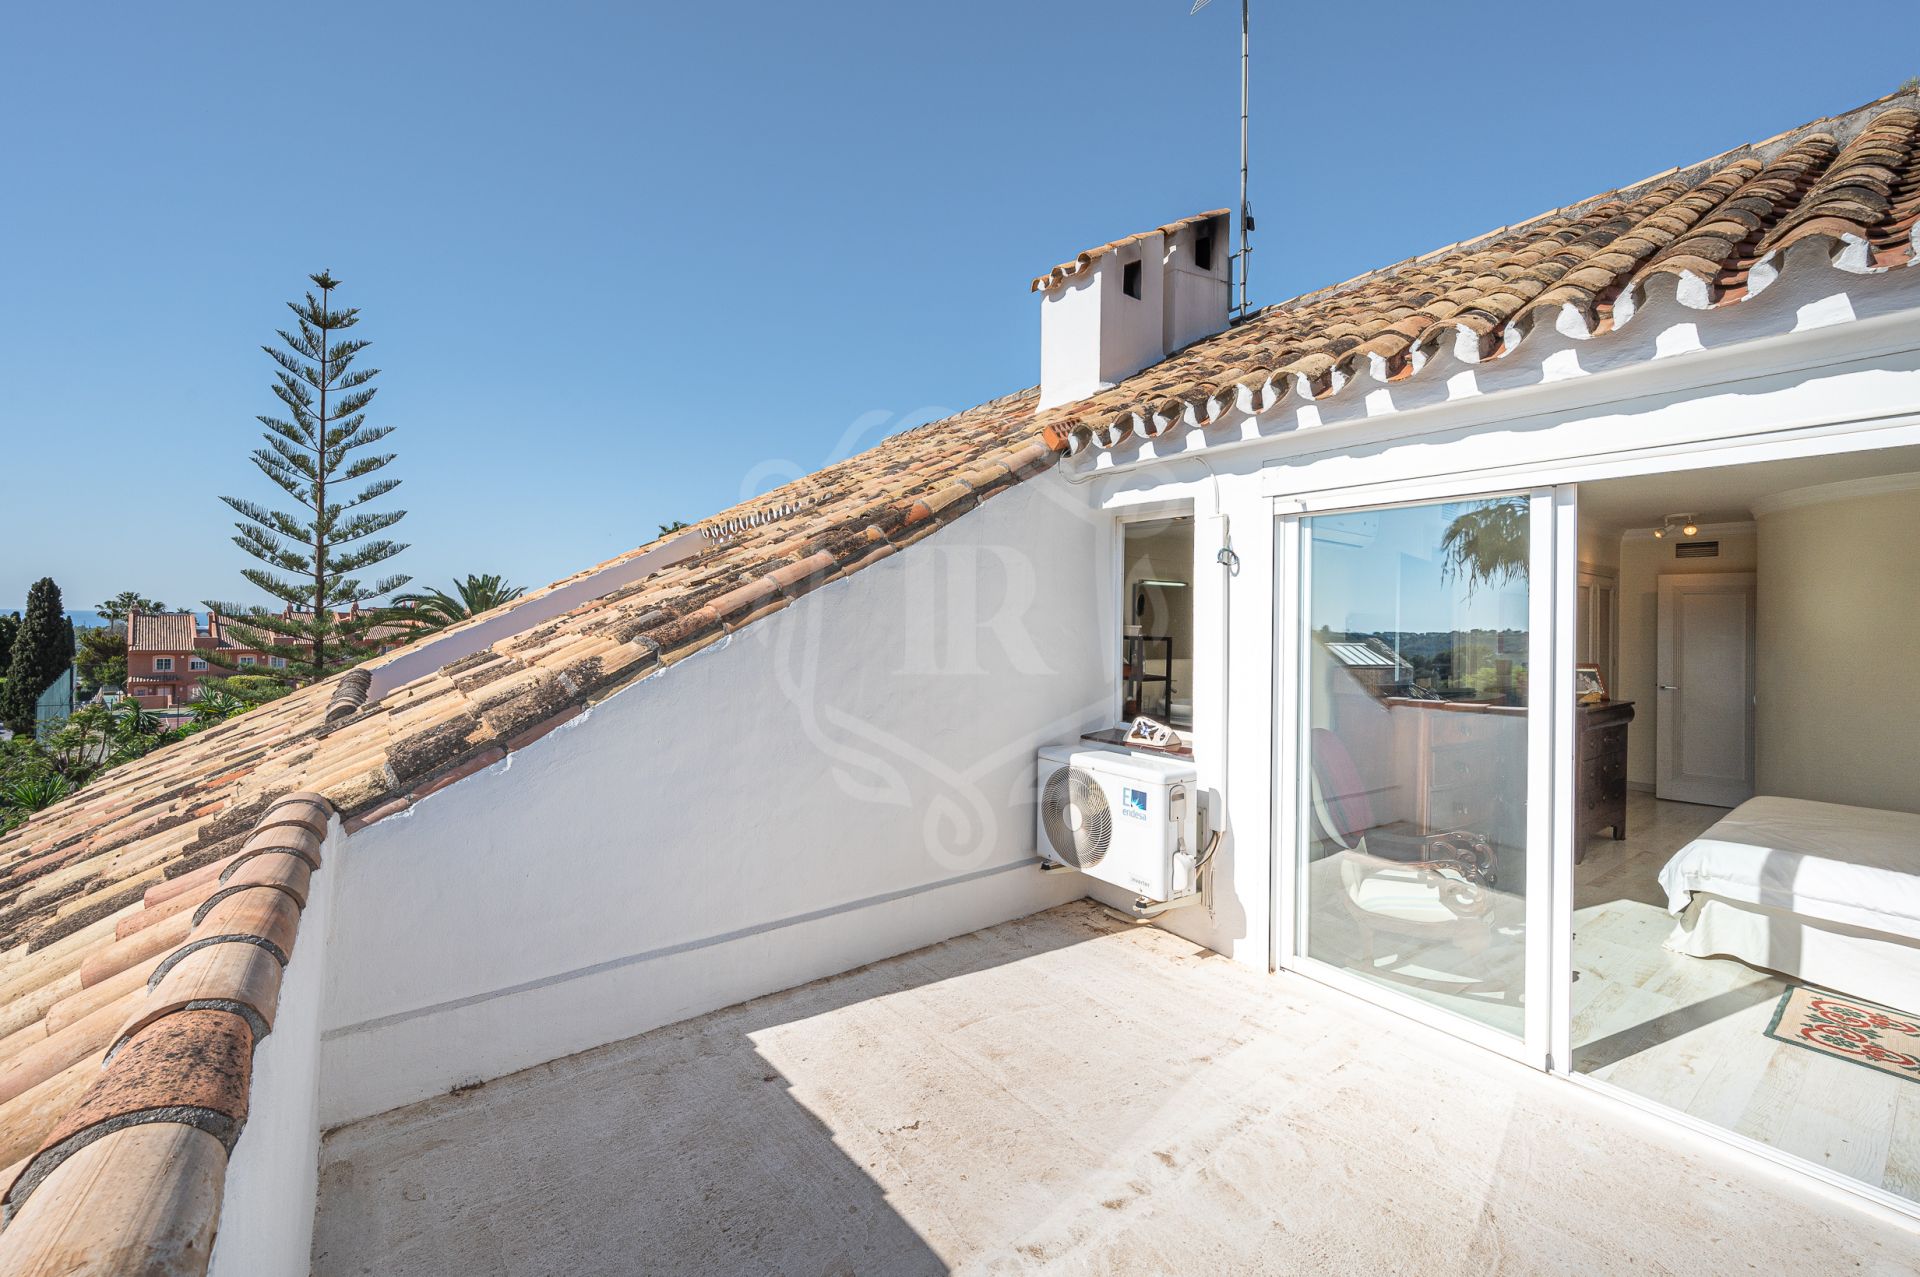 Town House for sale in Nueva Andalucia, Marbella